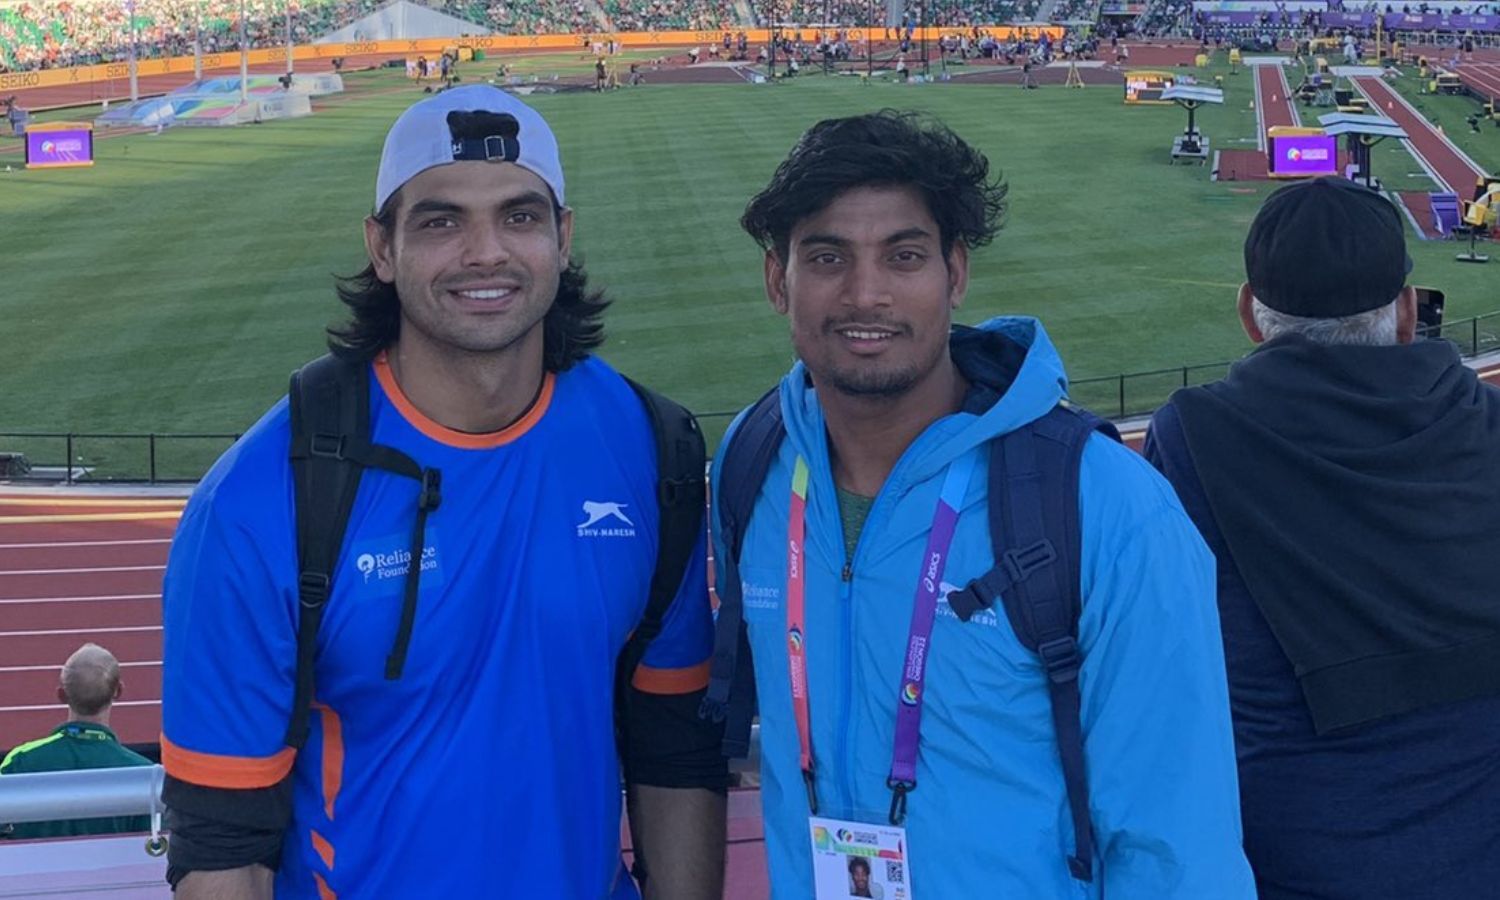 ‘Neeraj Chopra’s Olympic gold has spoilt Indian followers’ — What to anticipate in World Athletics Championships javelin throw last